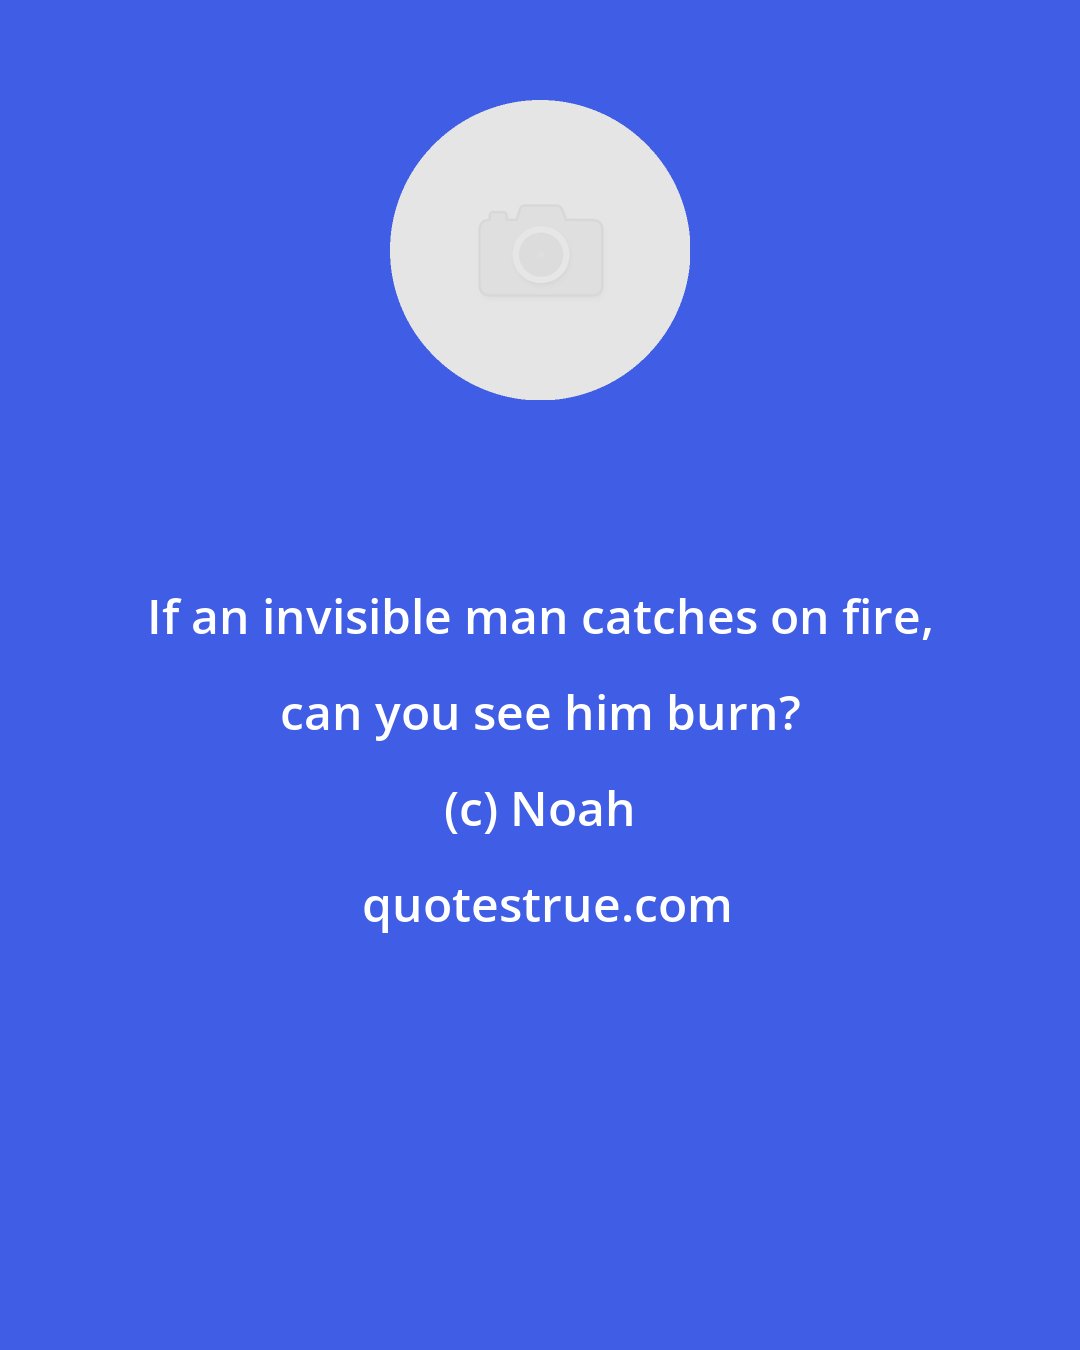 Noah: If an invisible man catches on fire, can you see him burn?